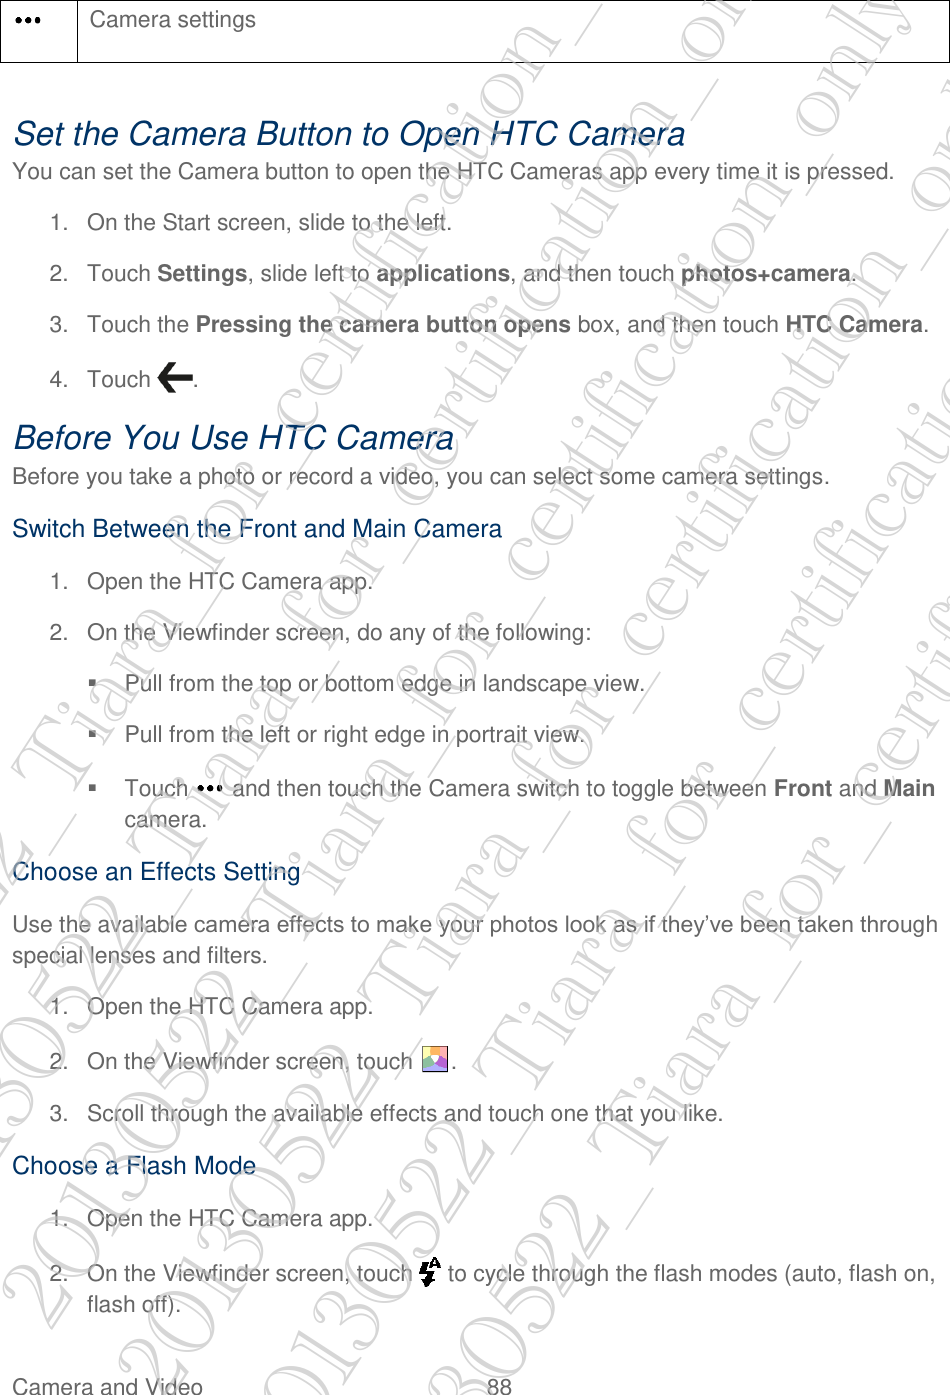  Camera and Video  88    Set the Camera Button to Open HTC Camera You can set the Camera button to open the HTC Cameras app every time it is pressed. 1.  On the Start screen, slide to the left. 2.  Touch Settings, slide left to applications, and then touch photos+camera. 3.  Touch the Pressing the camera button opens box, and then touch HTC Camera. 4.  Touch  . Before You Use HTC Camera Before you take a photo or record a video, you can select some camera settings. Switch Between the Front and Main Camera 1.  Open the HTC Camera app. 2.  On the Viewfinder screen, do any of the following:   Pull from the top or bottom edge in landscape view.   Pull from the left or right edge in portrait view.   Touch   and then touch the Camera switch to toggle between Front and Main camera. Choose an Effects Setting Use the available camera effects to make your photos look as if they’ve been taken through special lenses and filters. 1.  Open the HTC Camera app. 2.  On the Viewfinder screen, touch  . 3.  Scroll through the available effects and touch one that you like. Choose a Flash Mode 1.  Open the HTC Camera app. 2.  On the Viewfinder screen, touch   to cycle through the flash modes (auto, flash on, flash off).  Camera settings 20130522_Tiara_for_certification_only 20130522_Tiara_for_certification_only 20130522_Tiara_for_certification_only 20130522_Tiara_for_certification_only 20130522_Tiara_for_certification_only 20130522_Tiara_for_certification_only